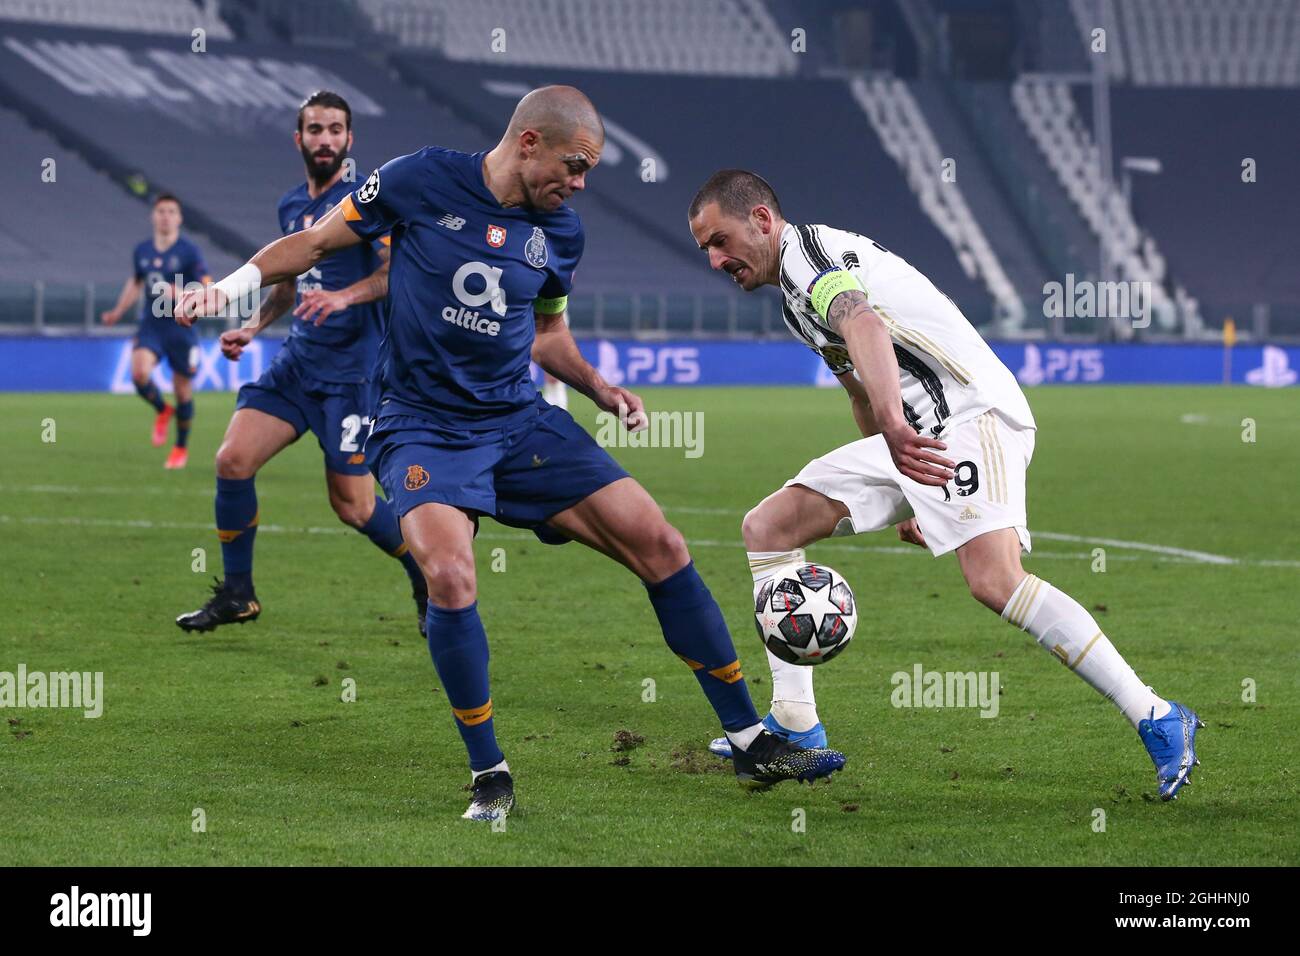 Leonardo Bonucci of Juventus is dispossessed by Pepe of FC Porto during the UEFA Champions League match at Allianz Stadium, Turin. Picture date: 9th March 2021. Picture credit should read: Jonathan Moscrop/Sportimage via PA Images Stock Photo